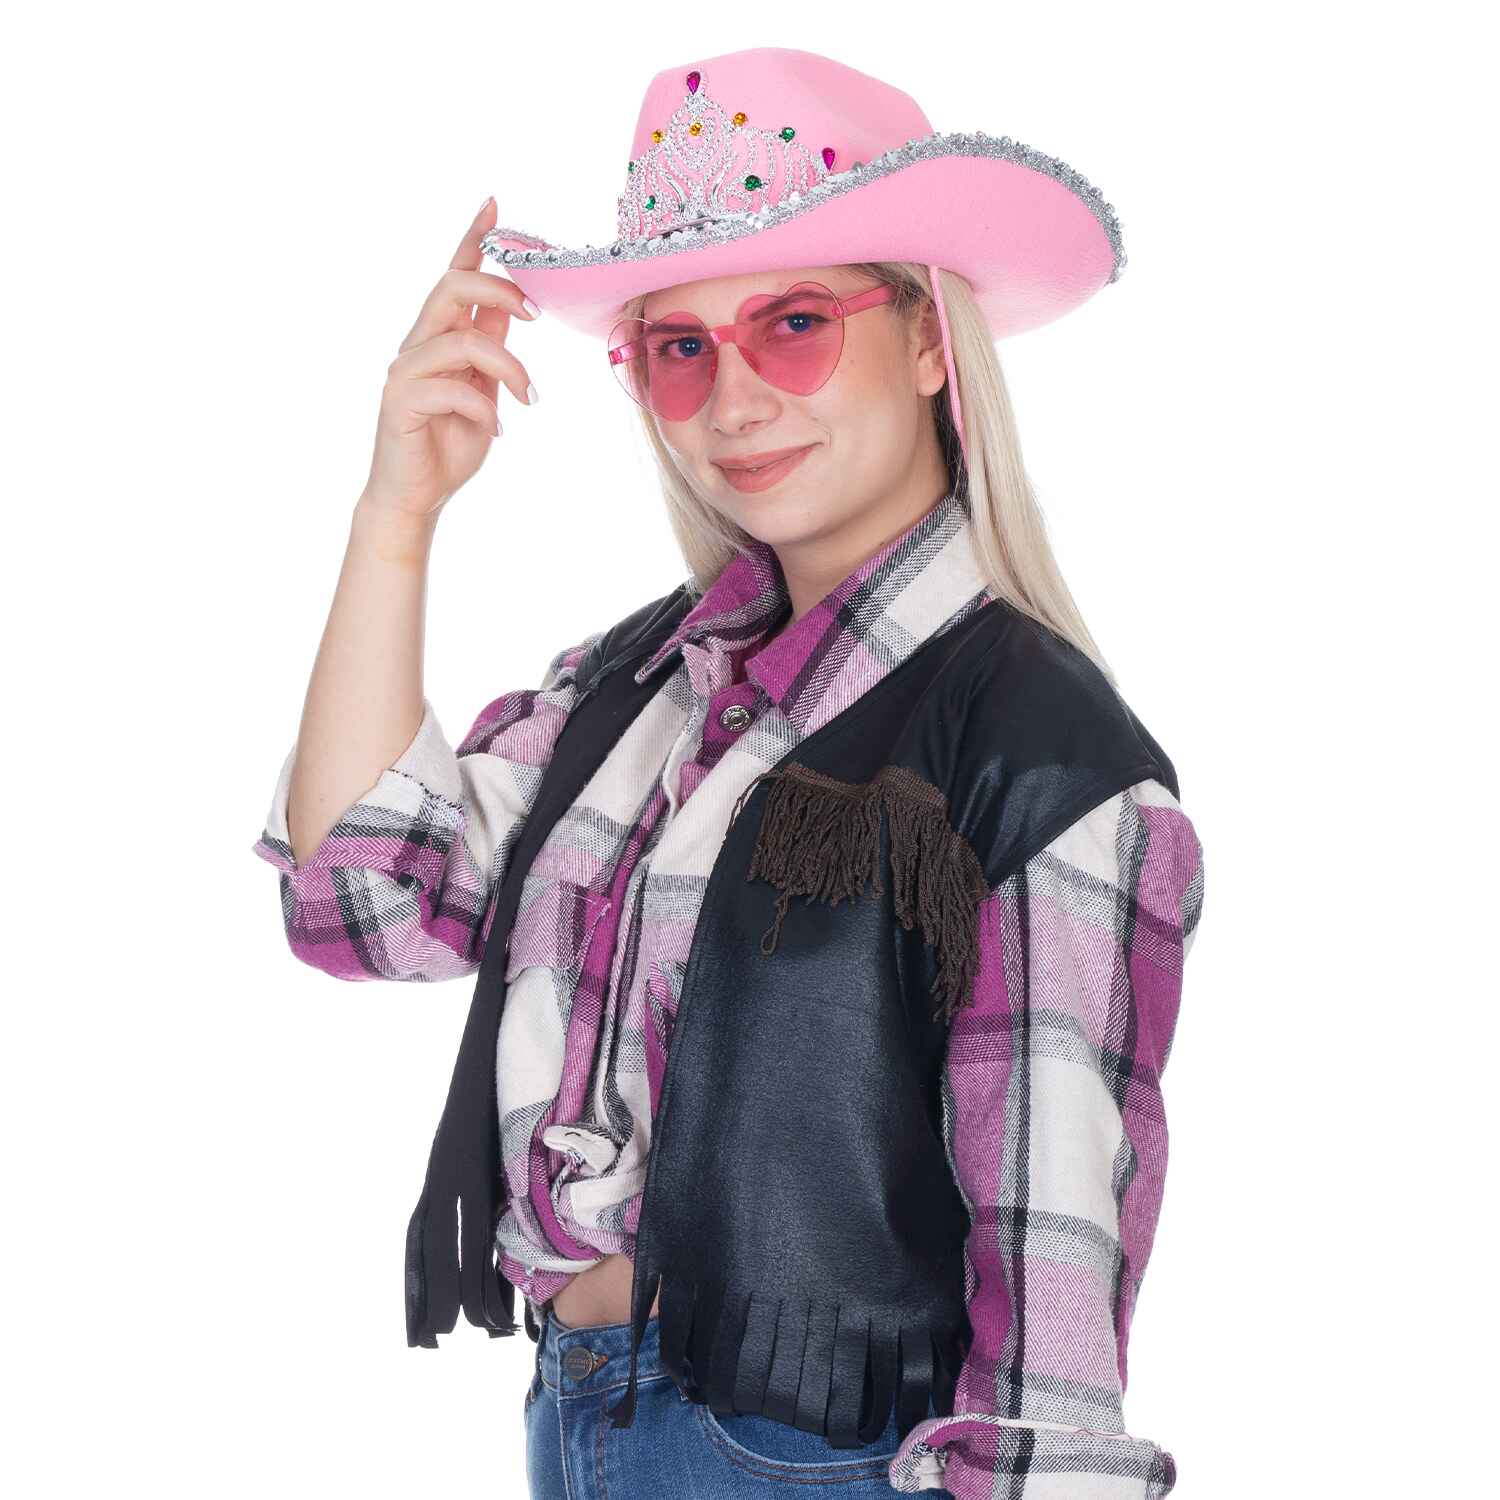 Pink Cowgirl Hat with Heart Glasses - Pink Cowboy Hat with Tiara Crown - FUNCREDIBLE